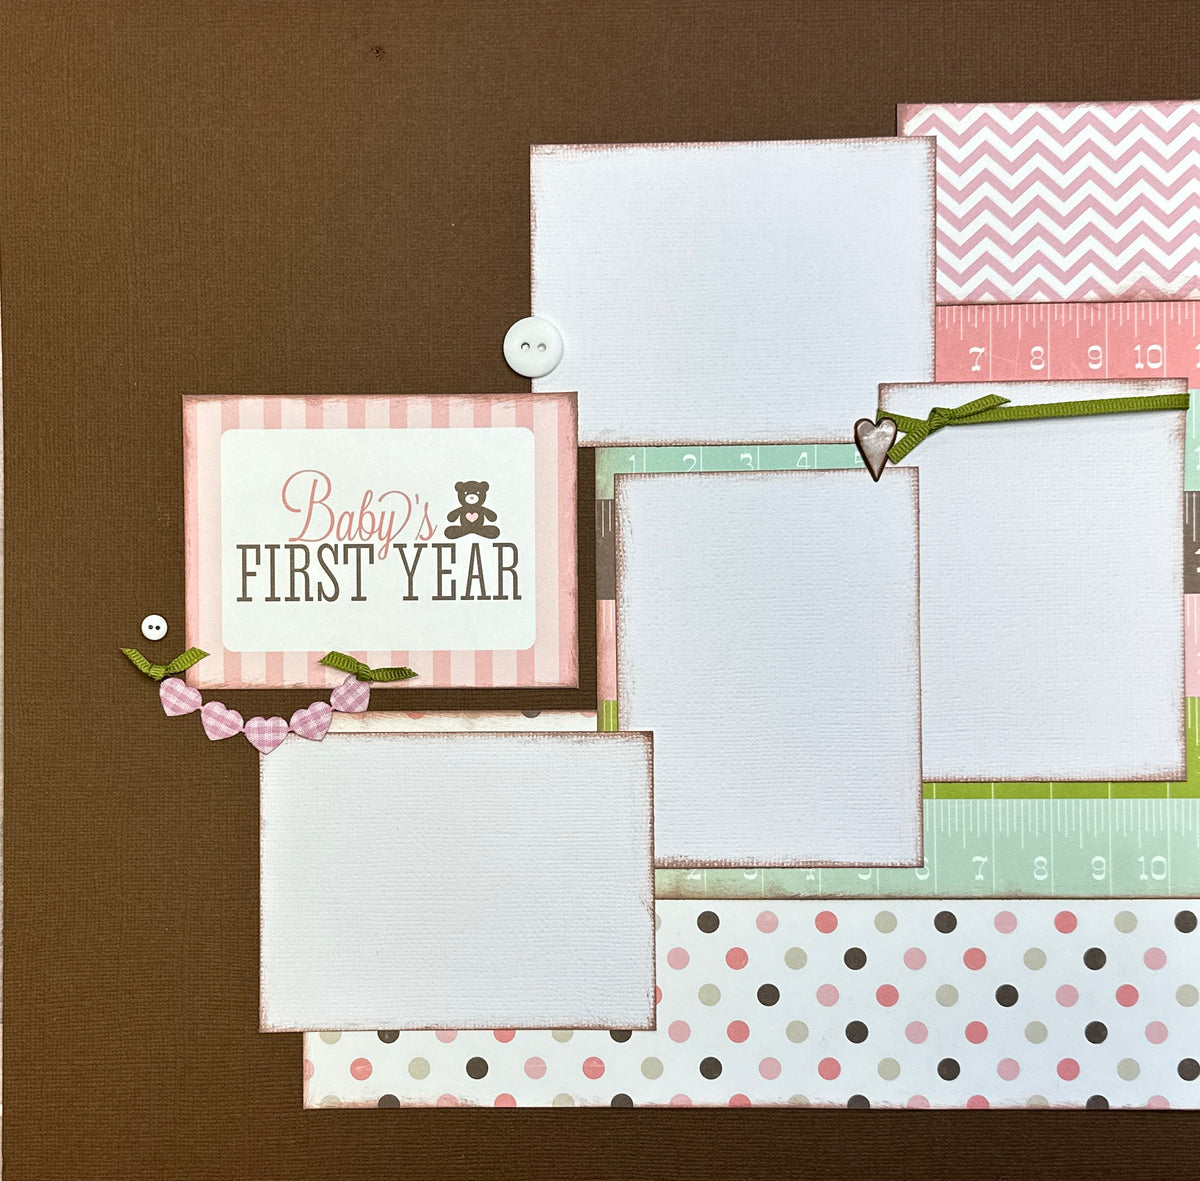 Scrapbooking Ideas For Baby Girl  Time Saving Baby Girl Scrapbook Layout  Ideas